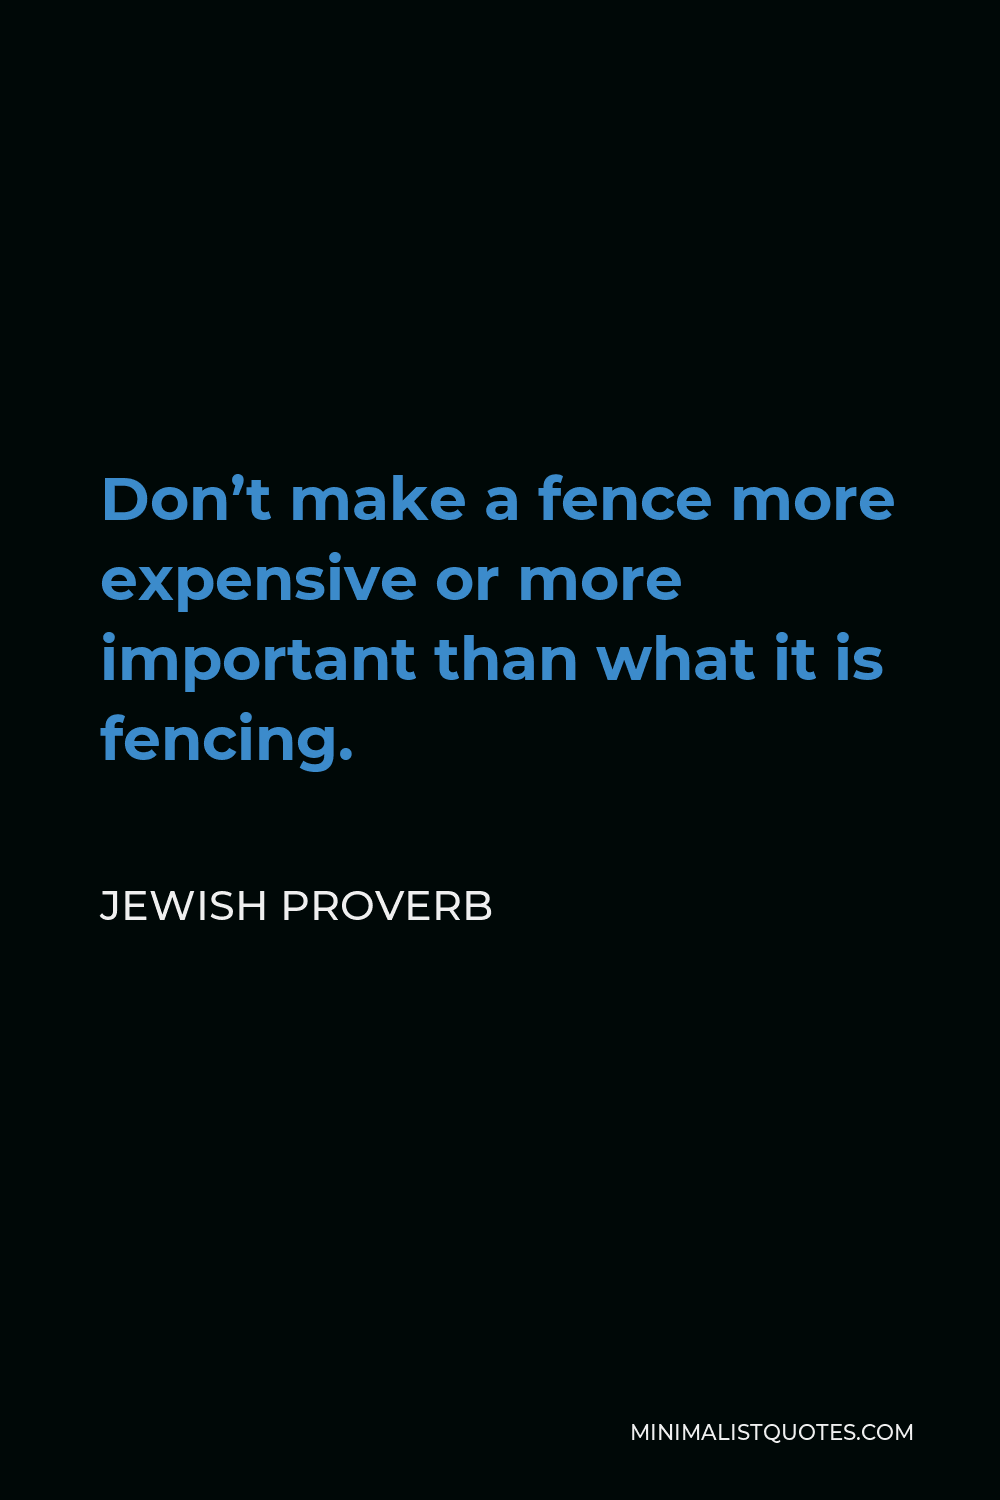 Jewish Proverb Quote - Don’t make a fence more expensive or more important than what it is fencing.